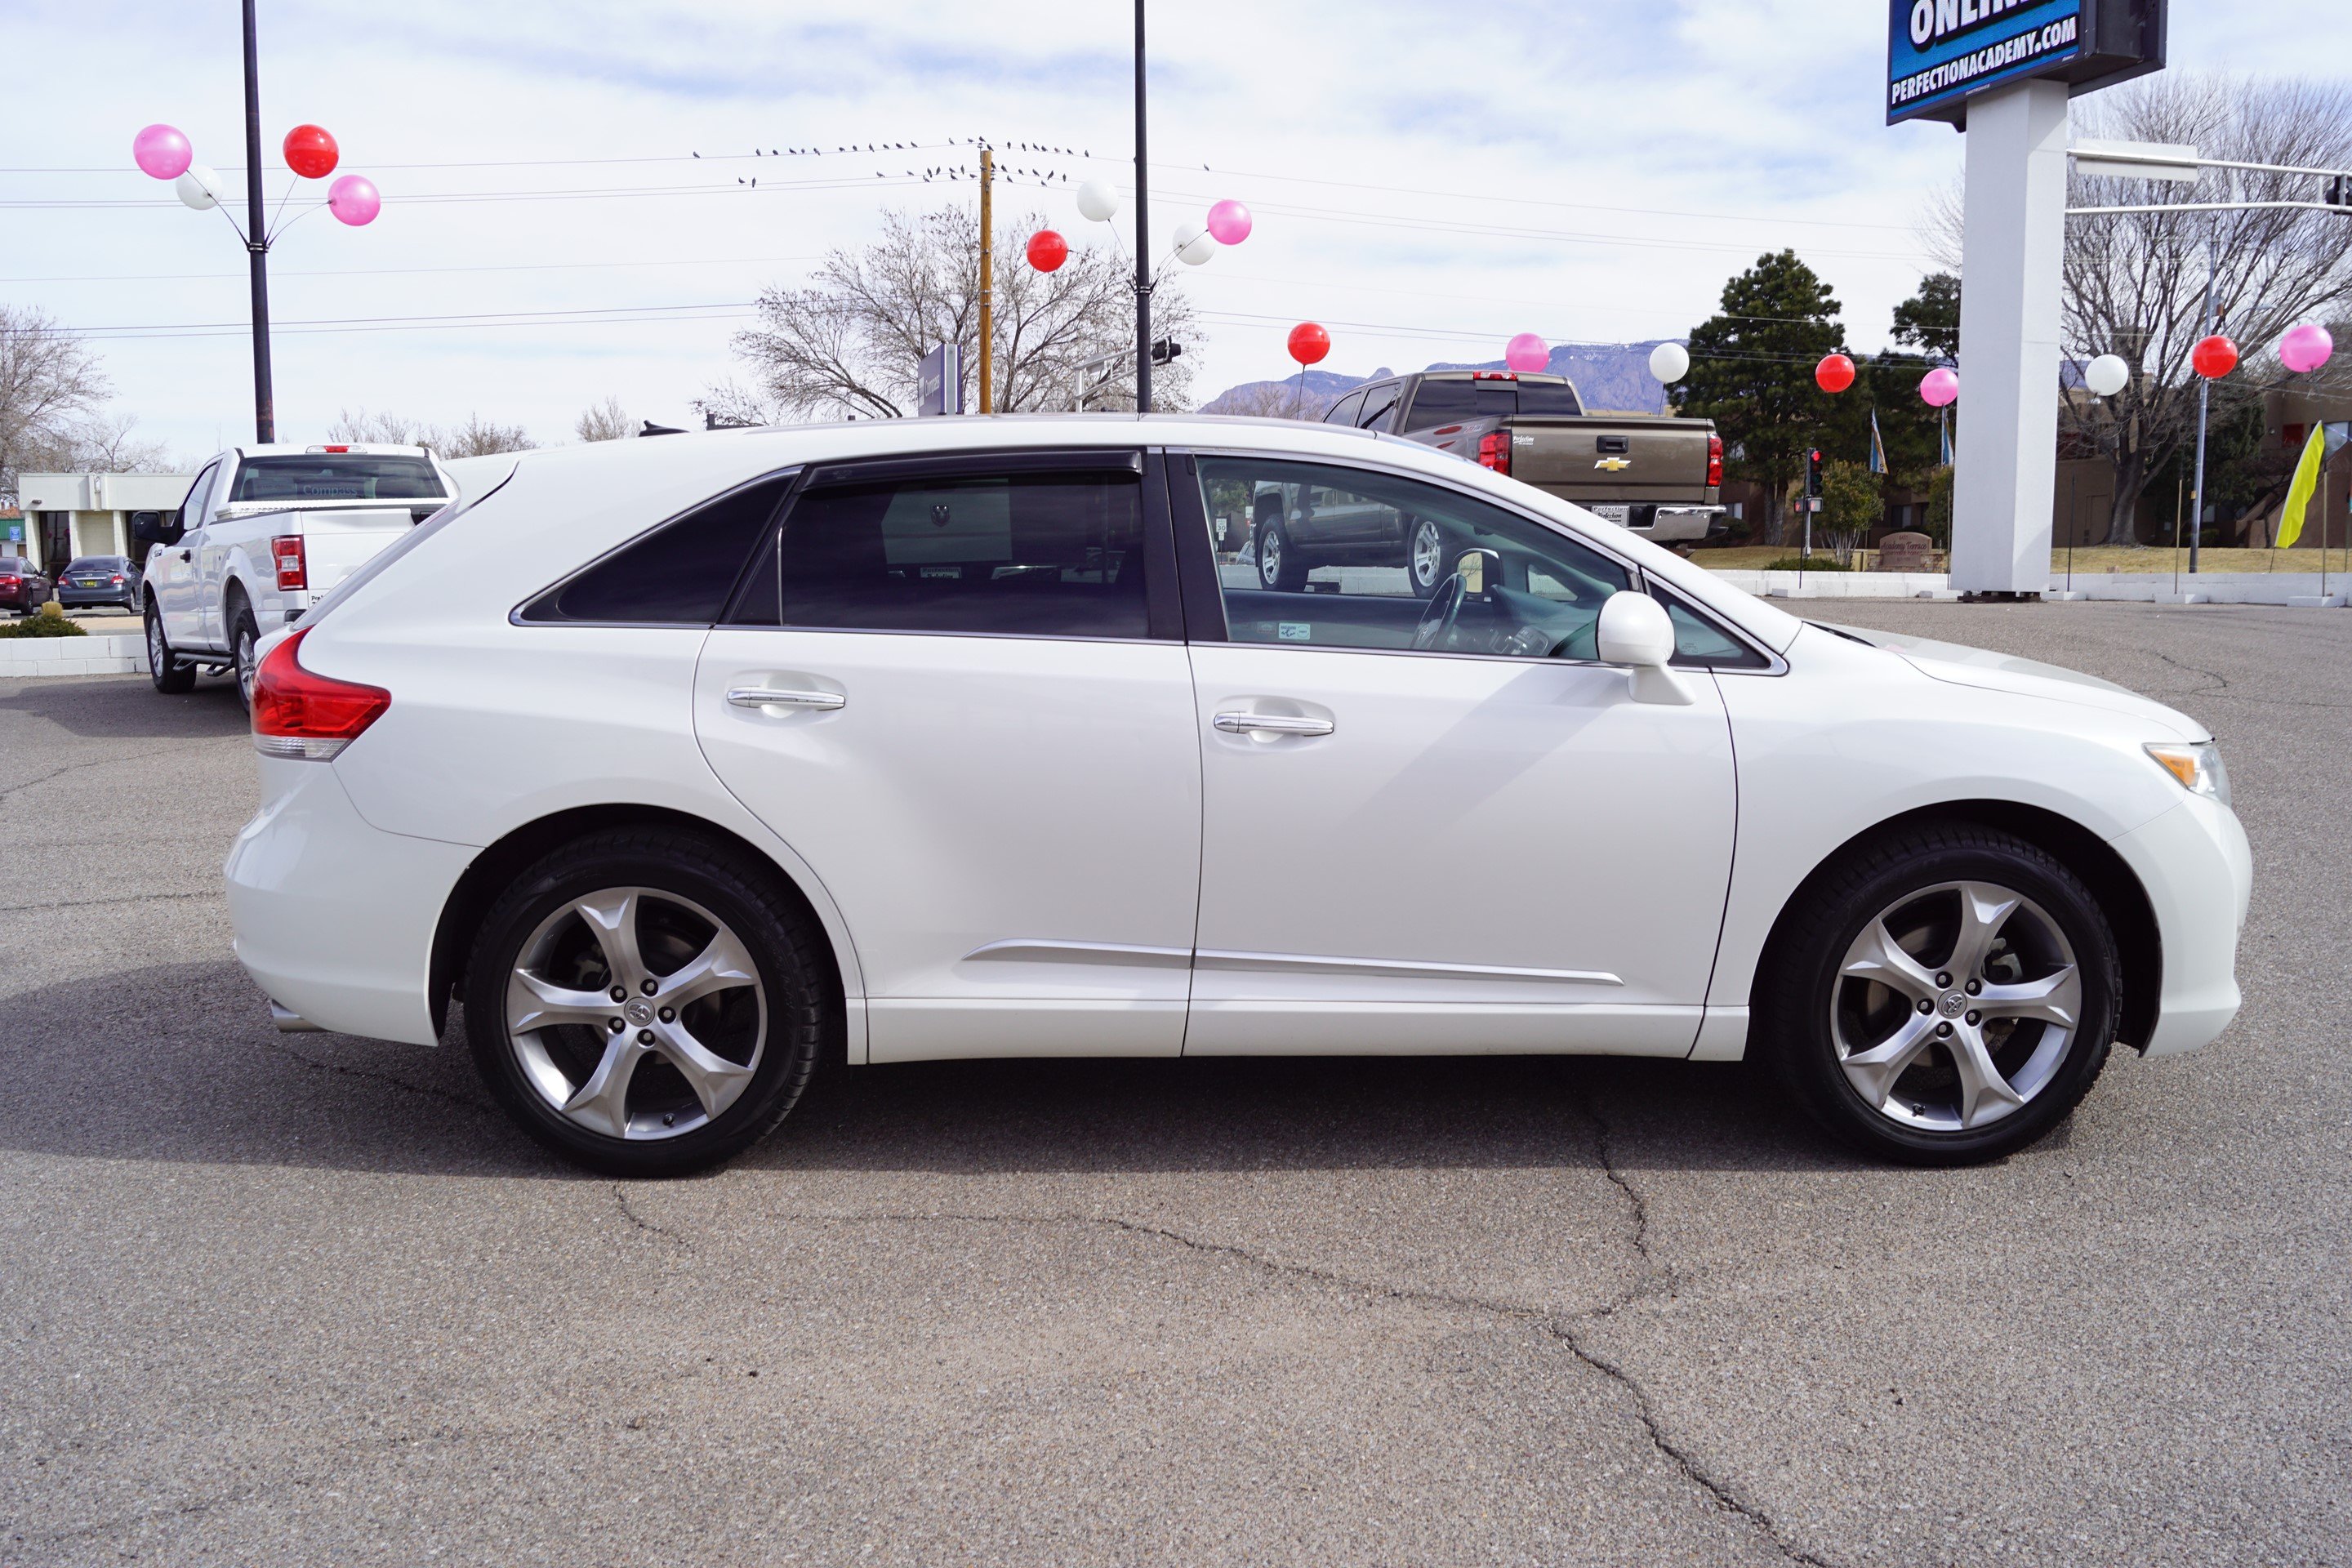 Pre-Owned 2011 Toyota Venza Base Sport Utility in Albuquerque #AP1198 ...